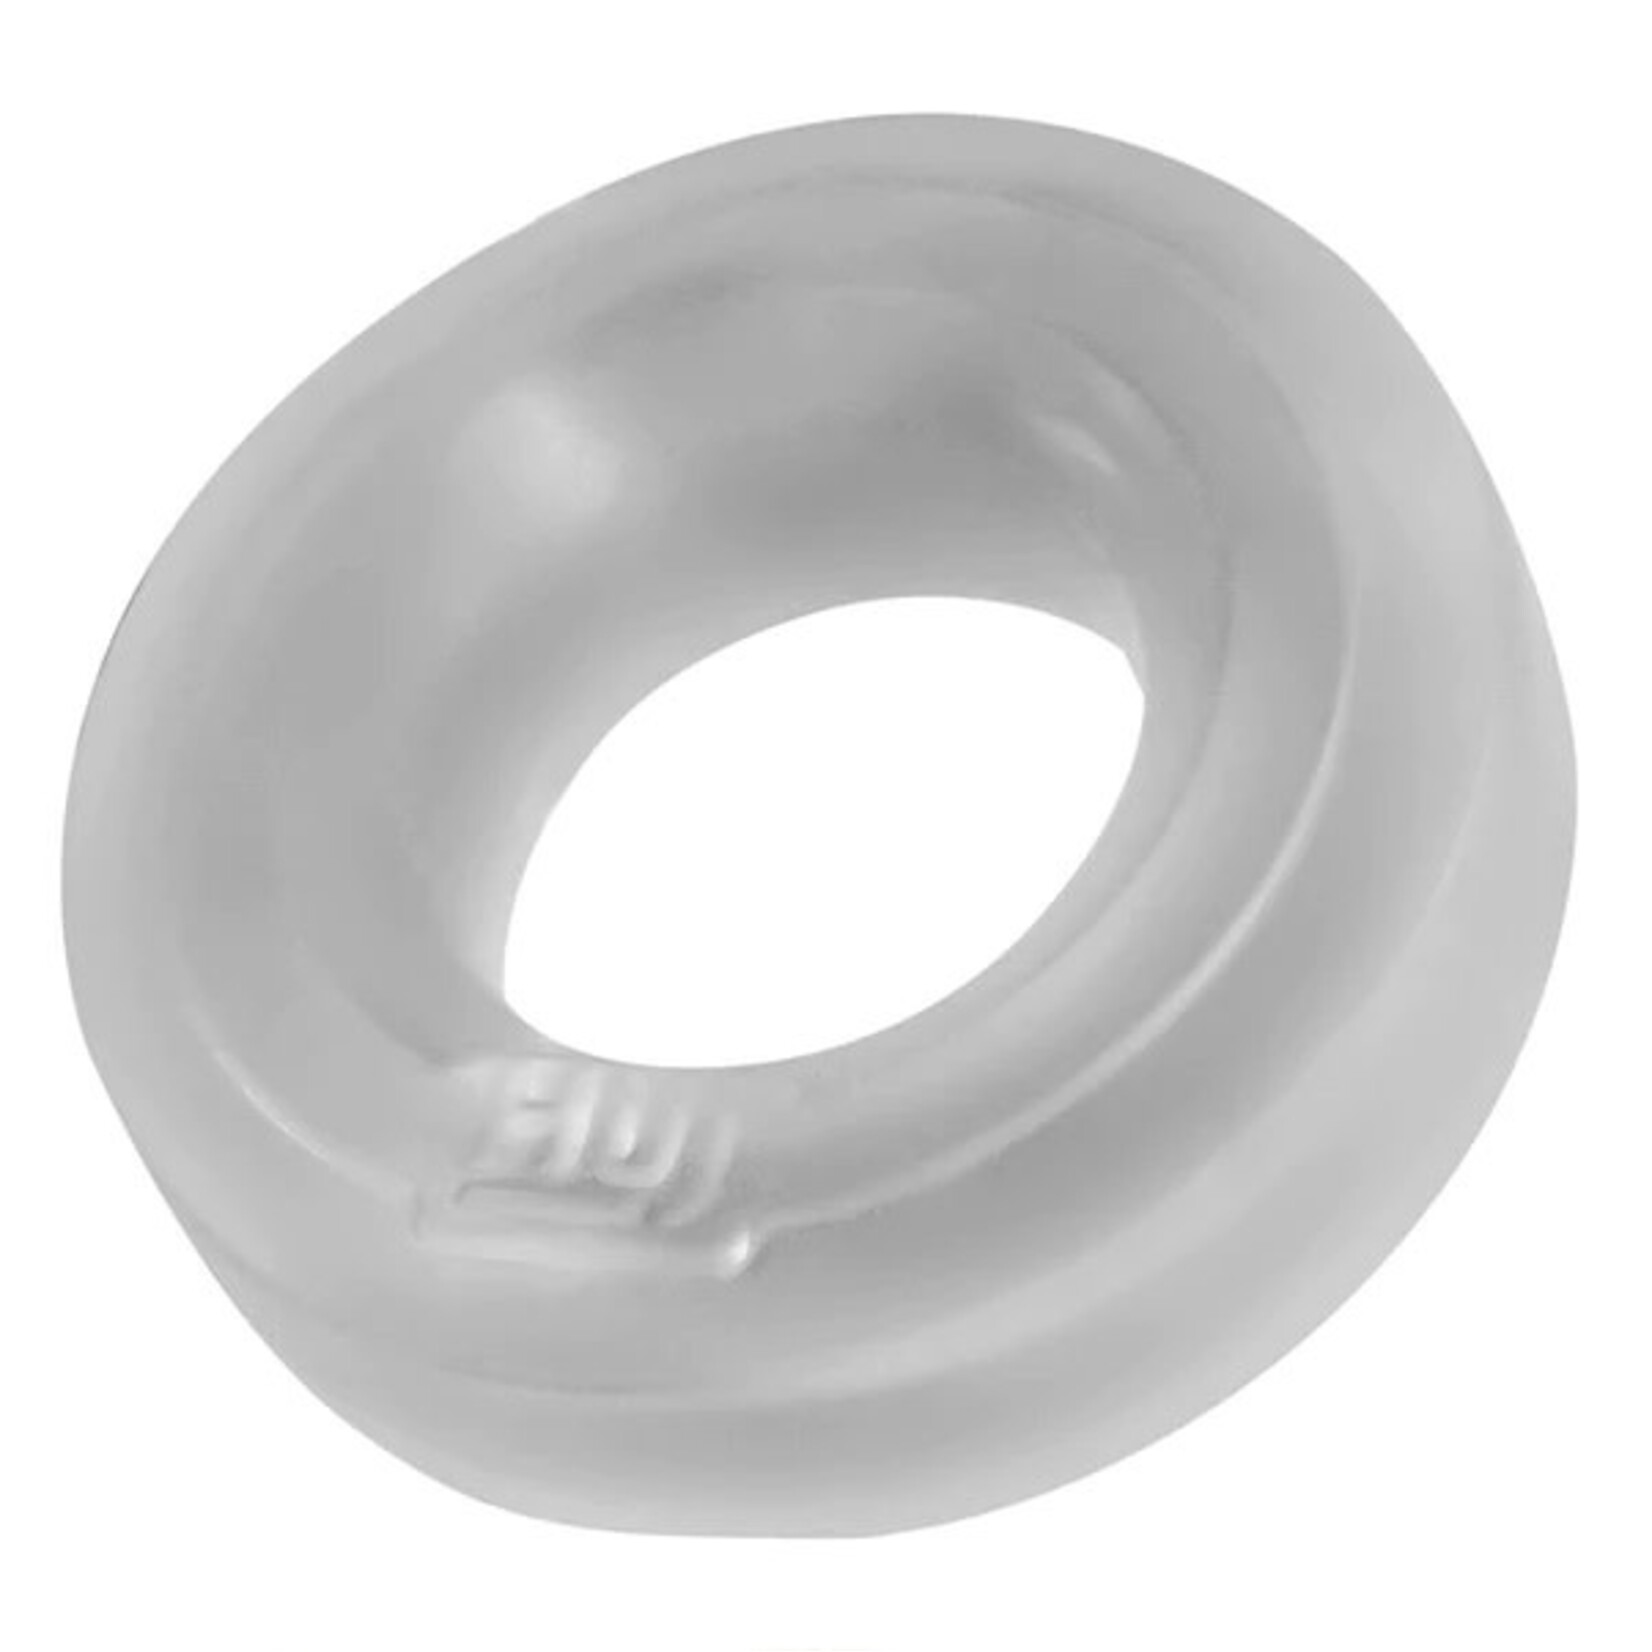 OXBALLS OXBALLS  HUNKY JUNK SINGLE C-RING ICE  CLEAR